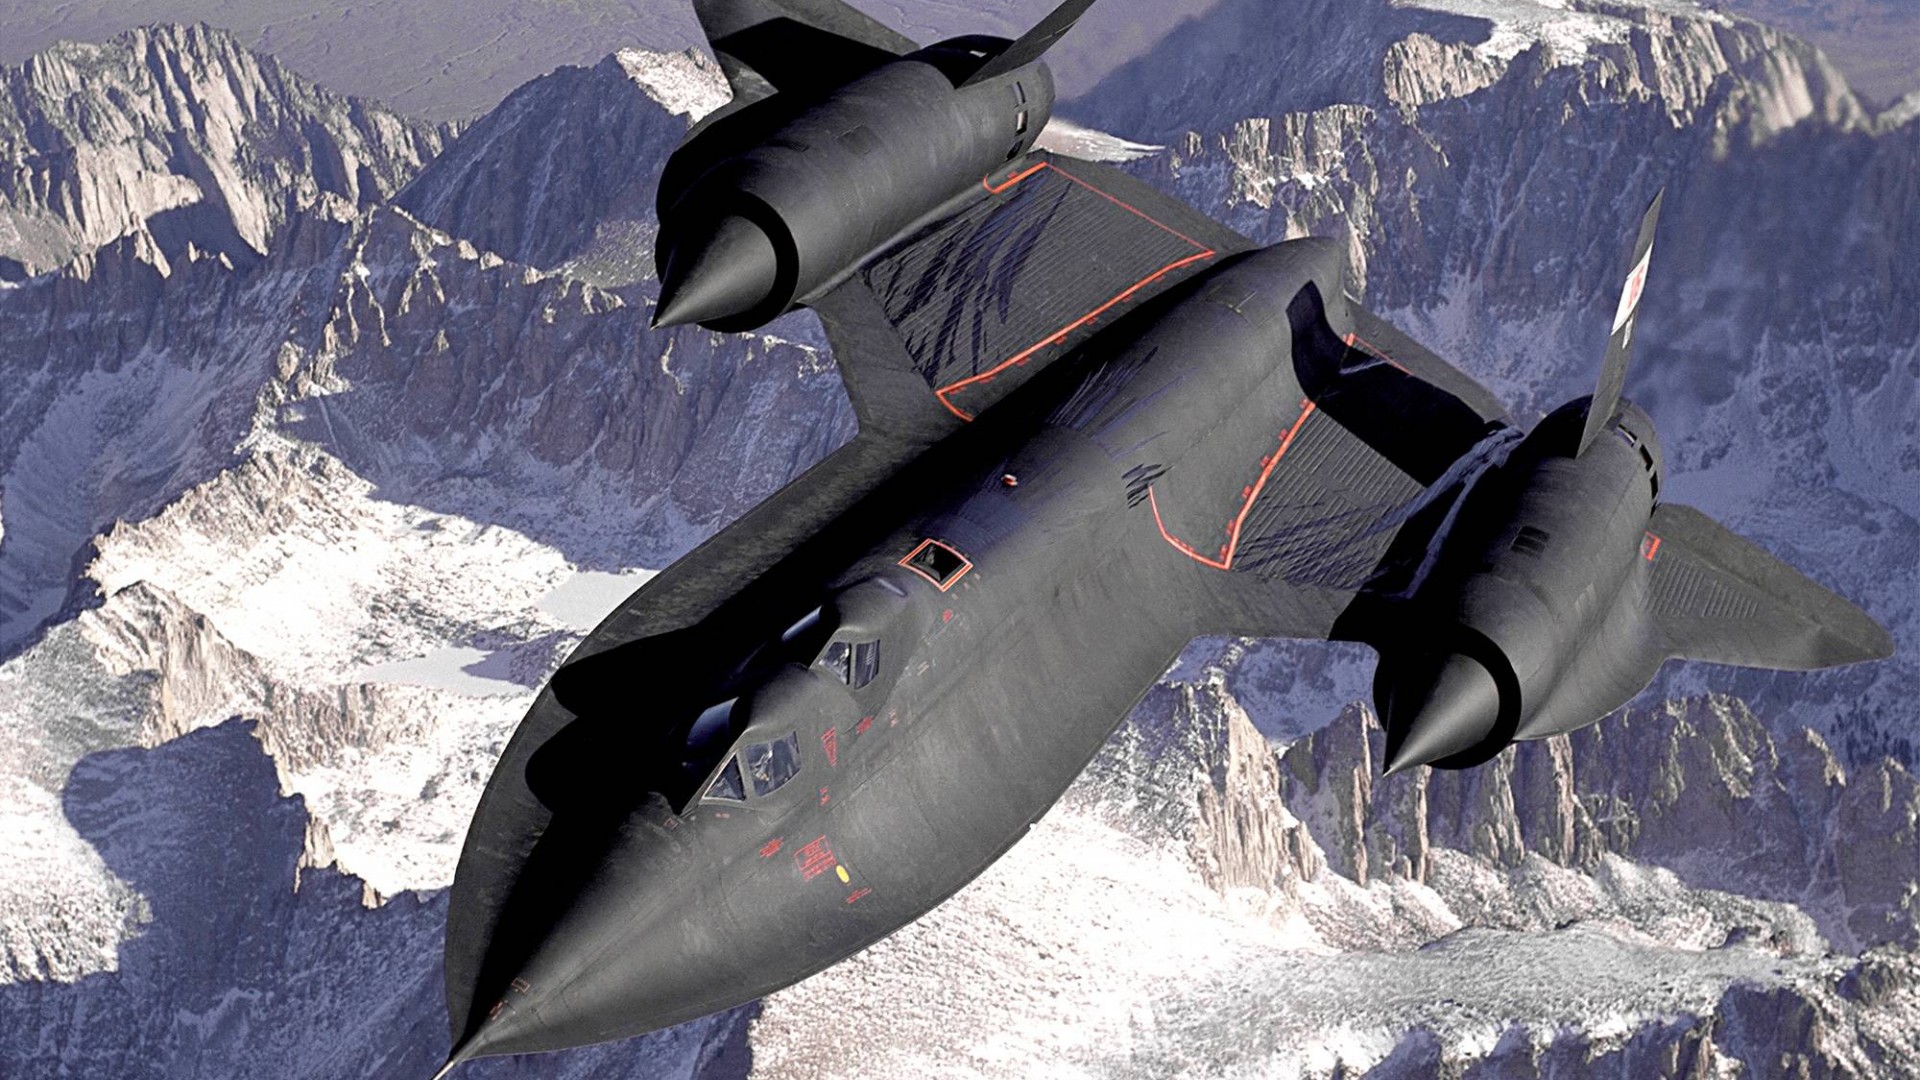 Wallpaper Blackbird Stealth Aircraft And Make This For Your